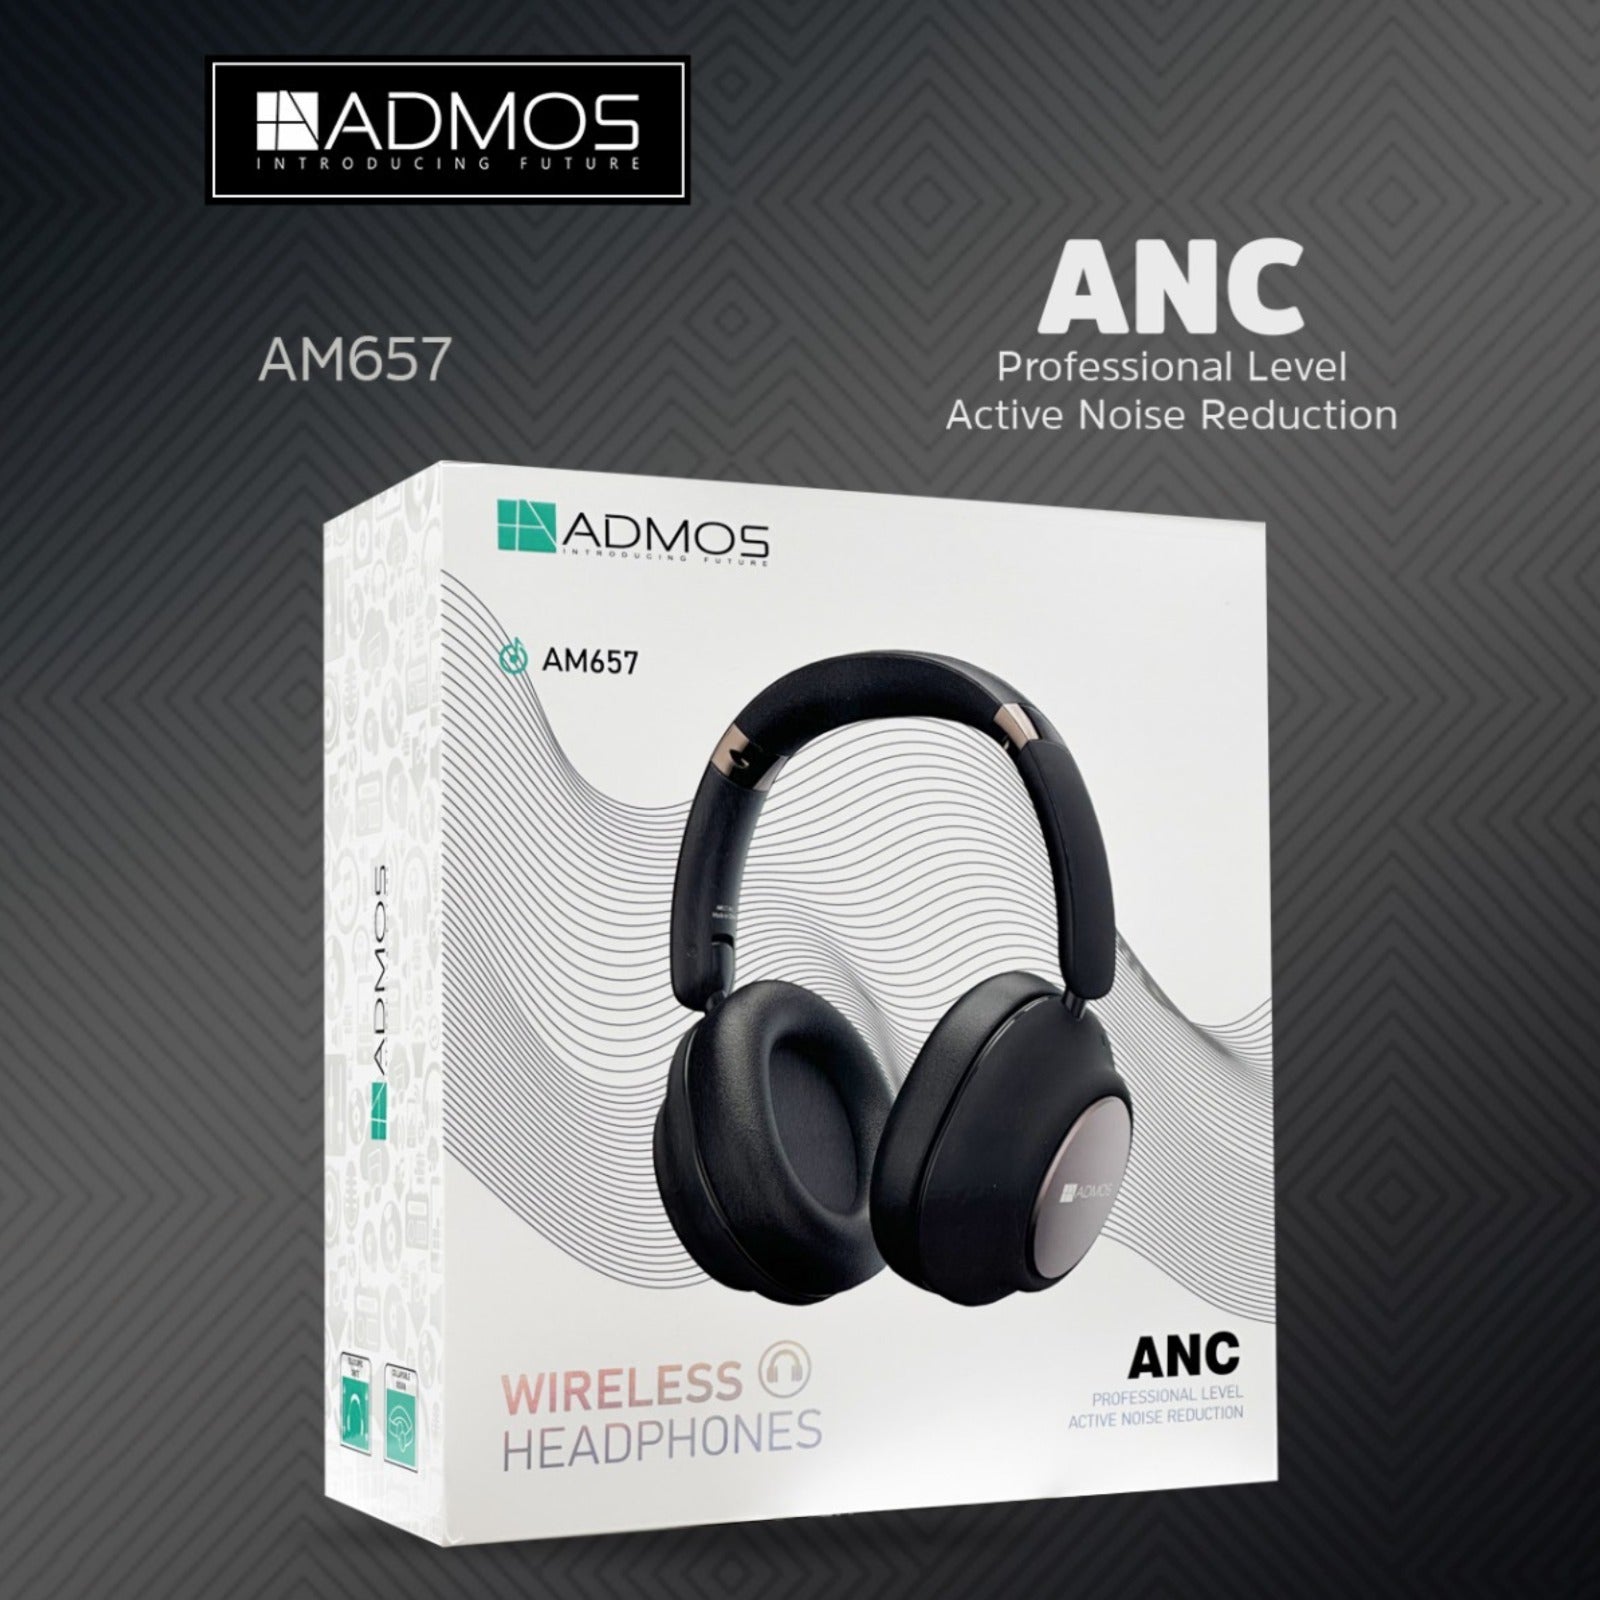 Package of ADMOS ANC Wireless Headphone.